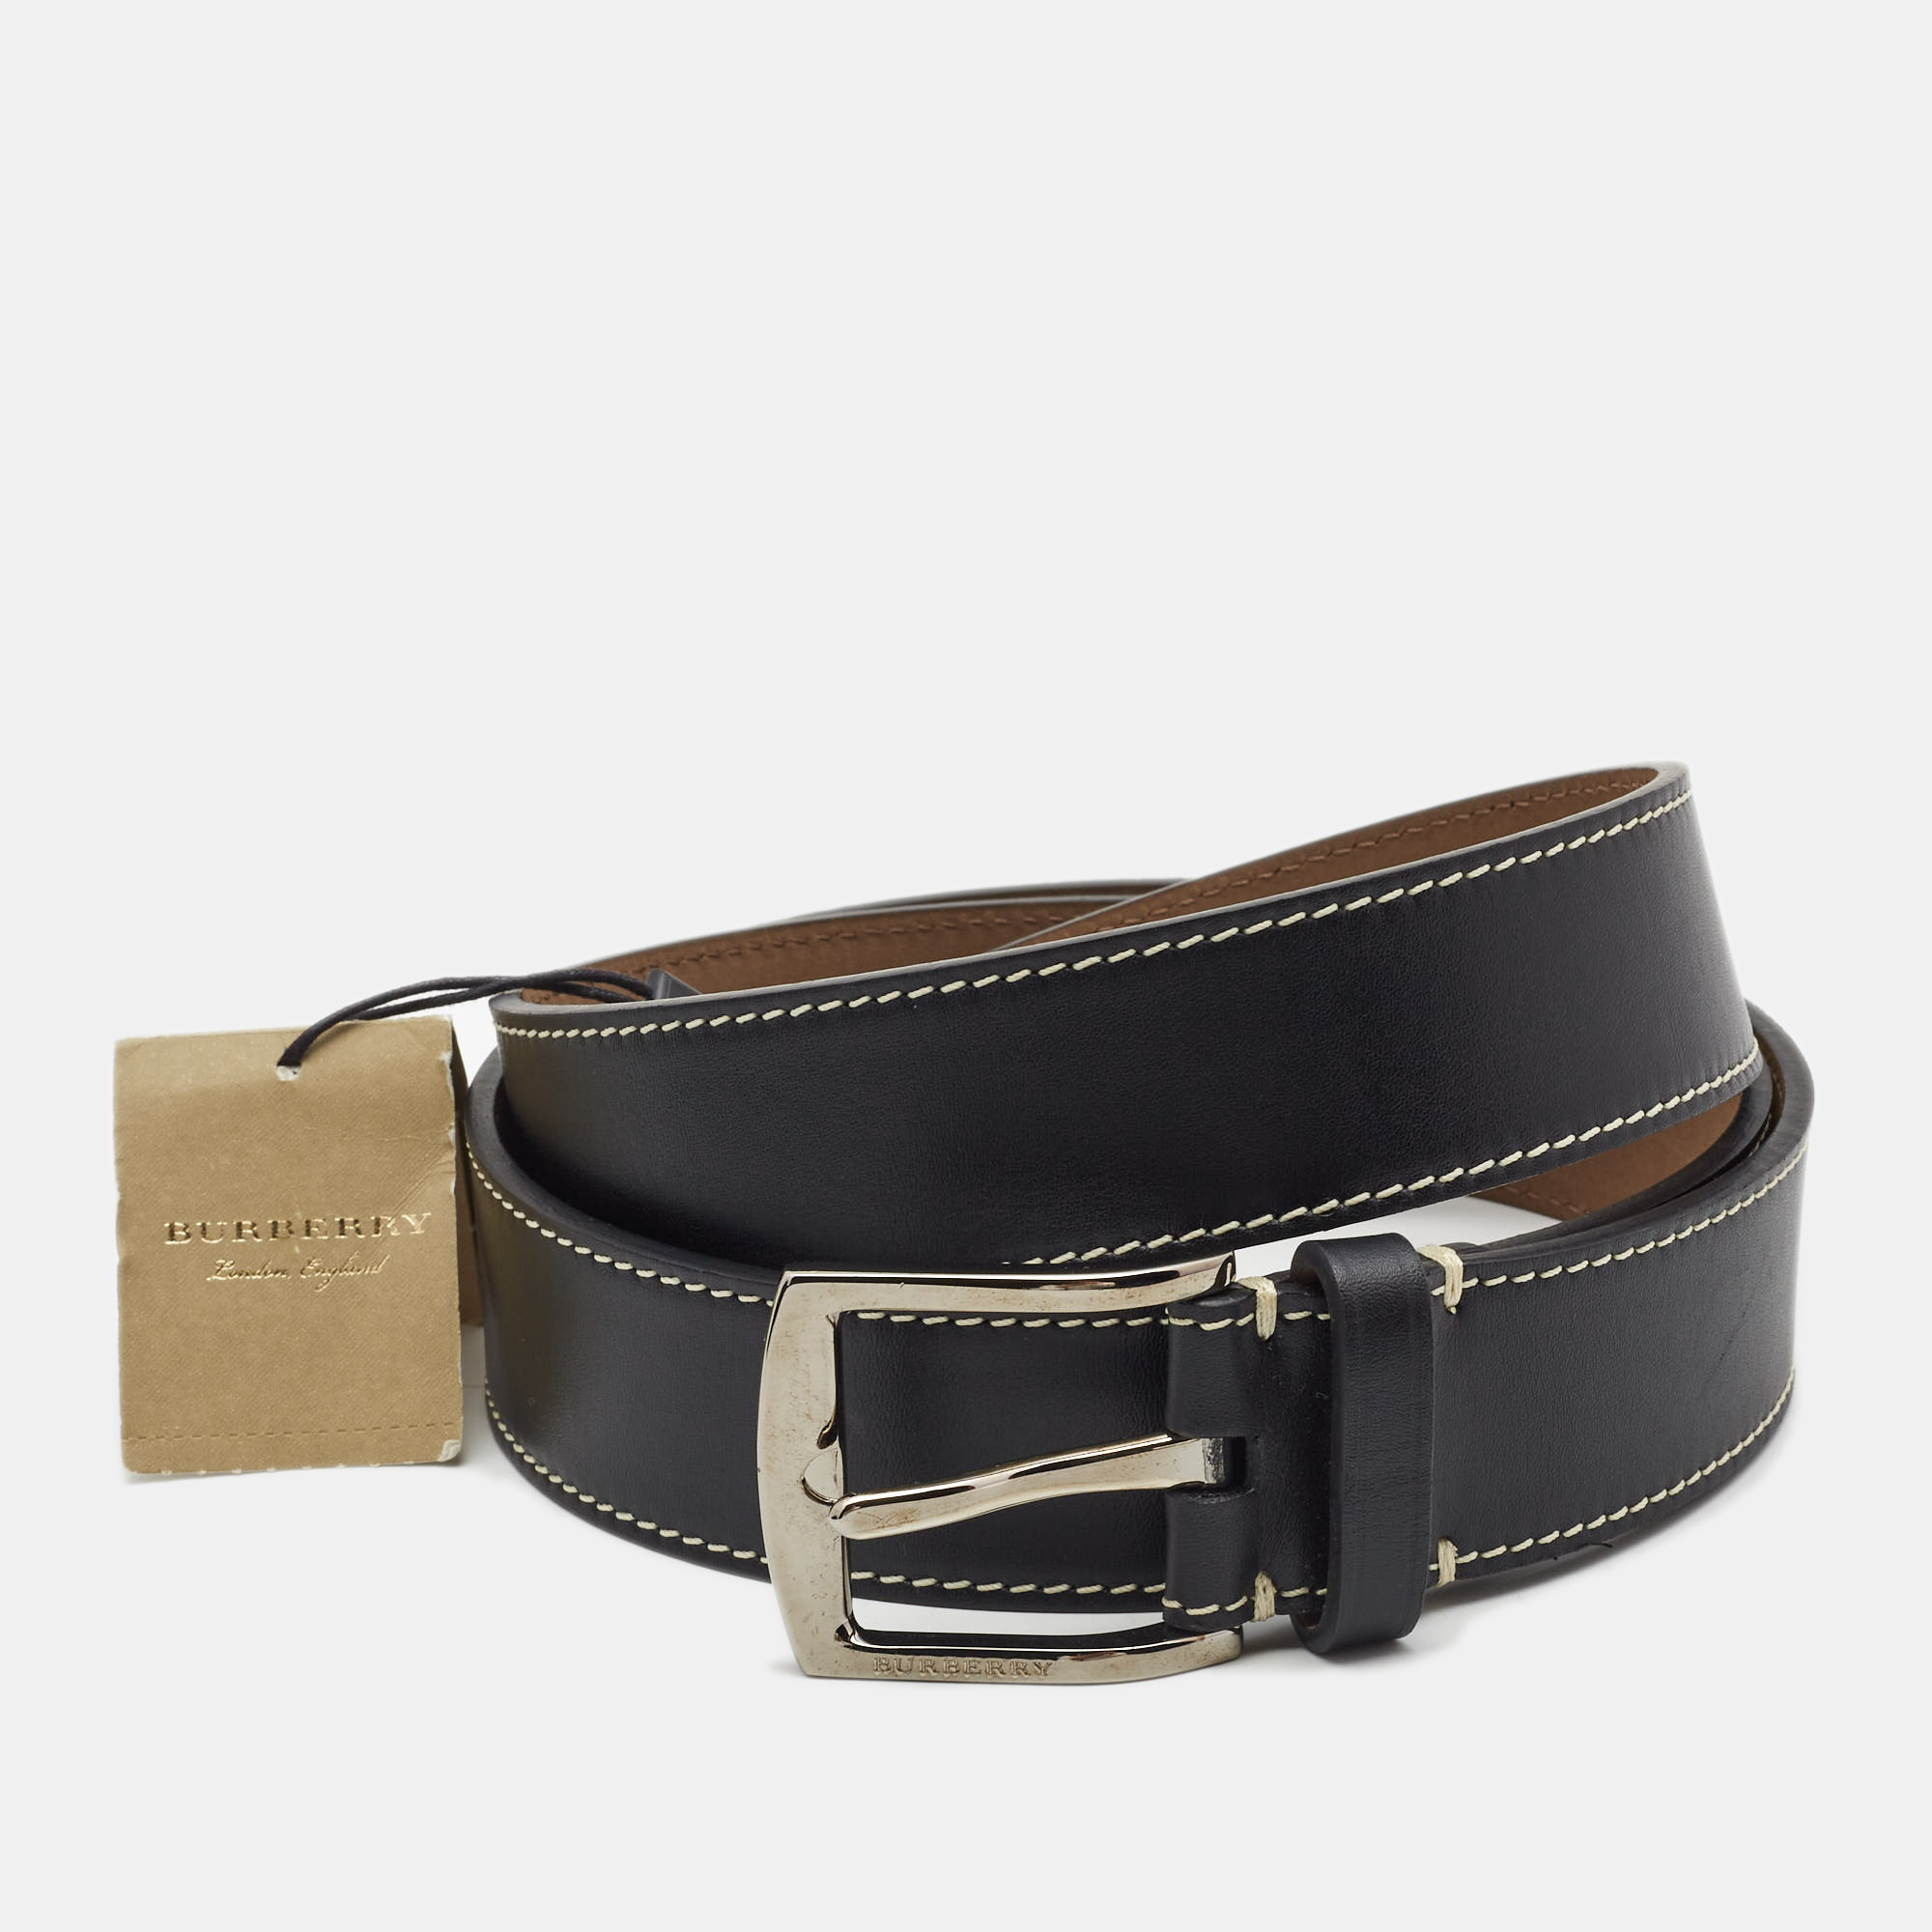 Pre-owned Burberry Black Leather Gray Buckle Belt 110cm